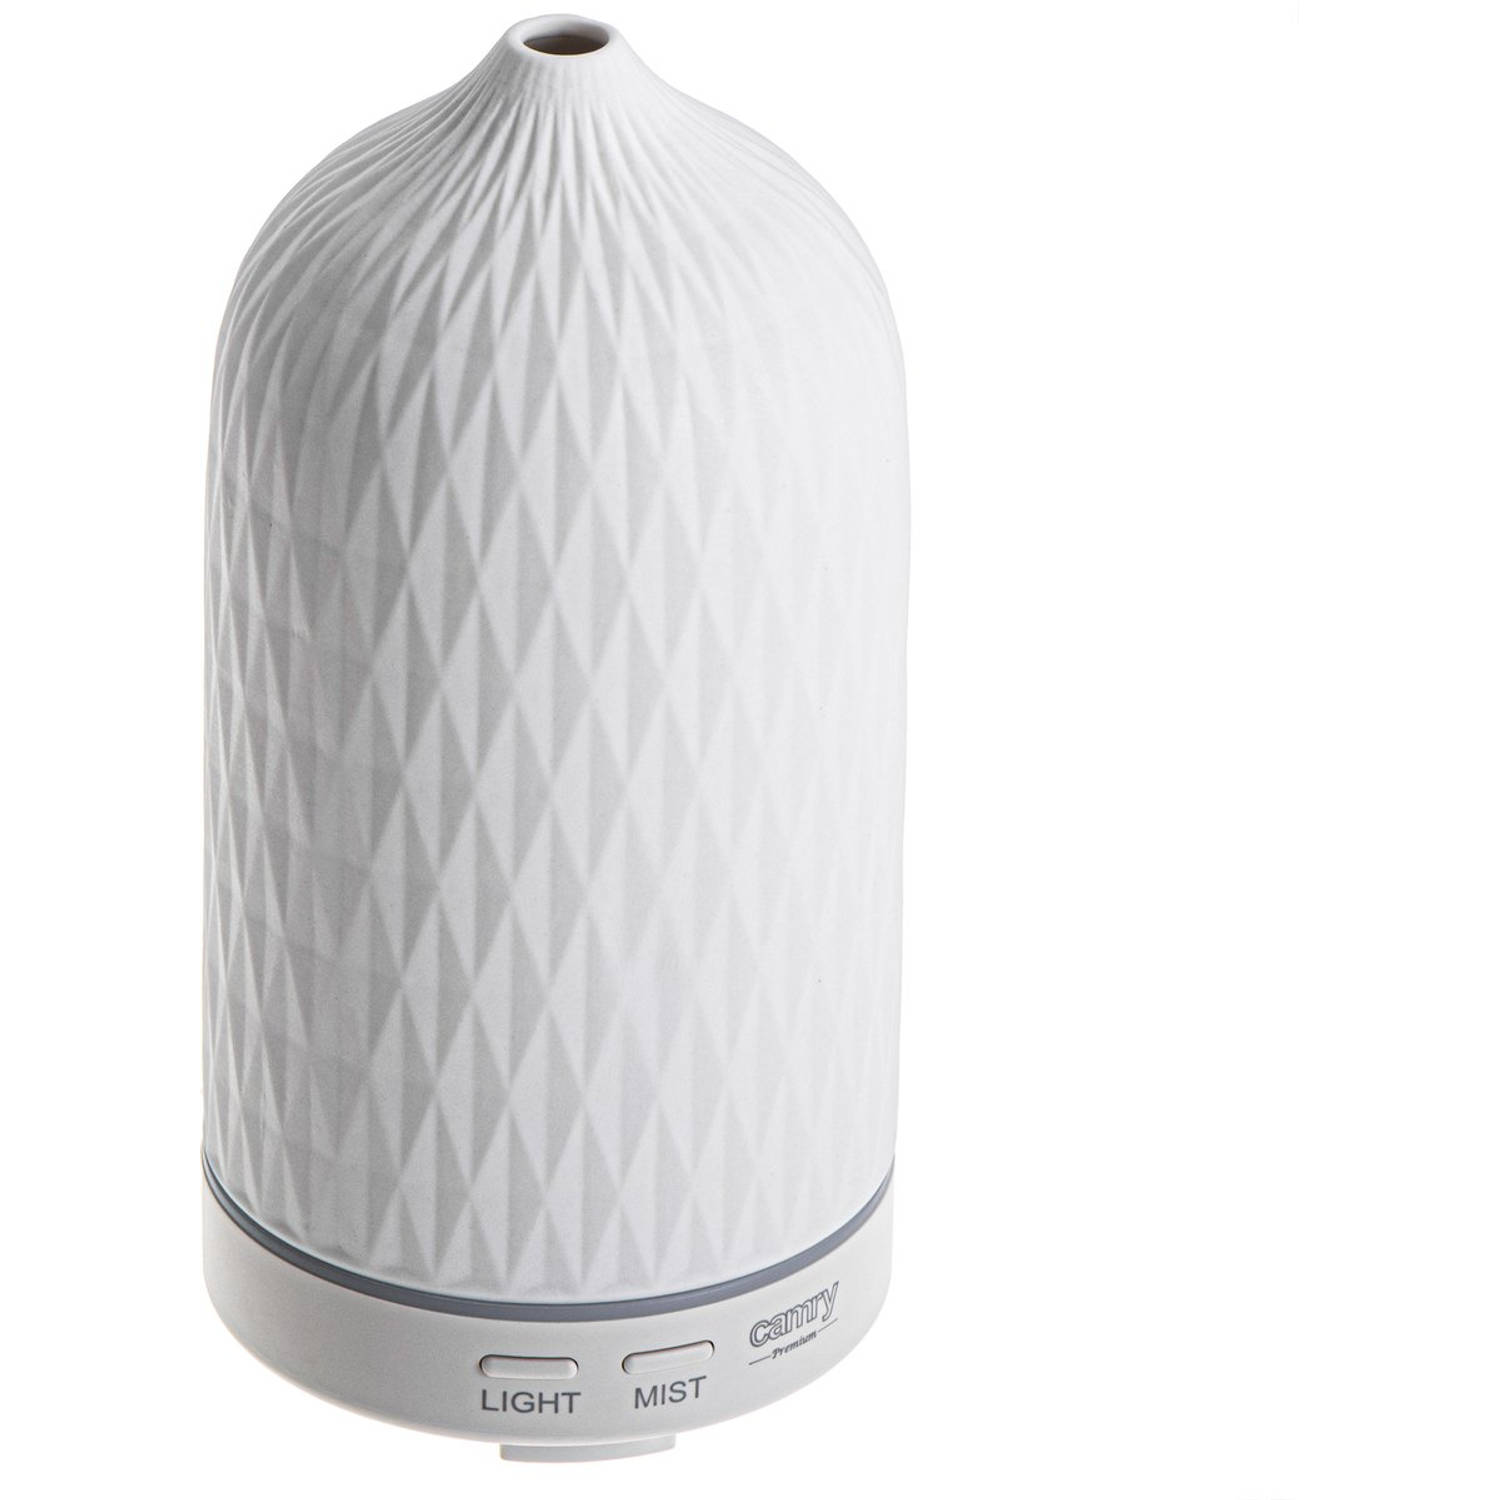 Camry CR 7970 Aroma Diffuser - 3 in 1 | Blokker